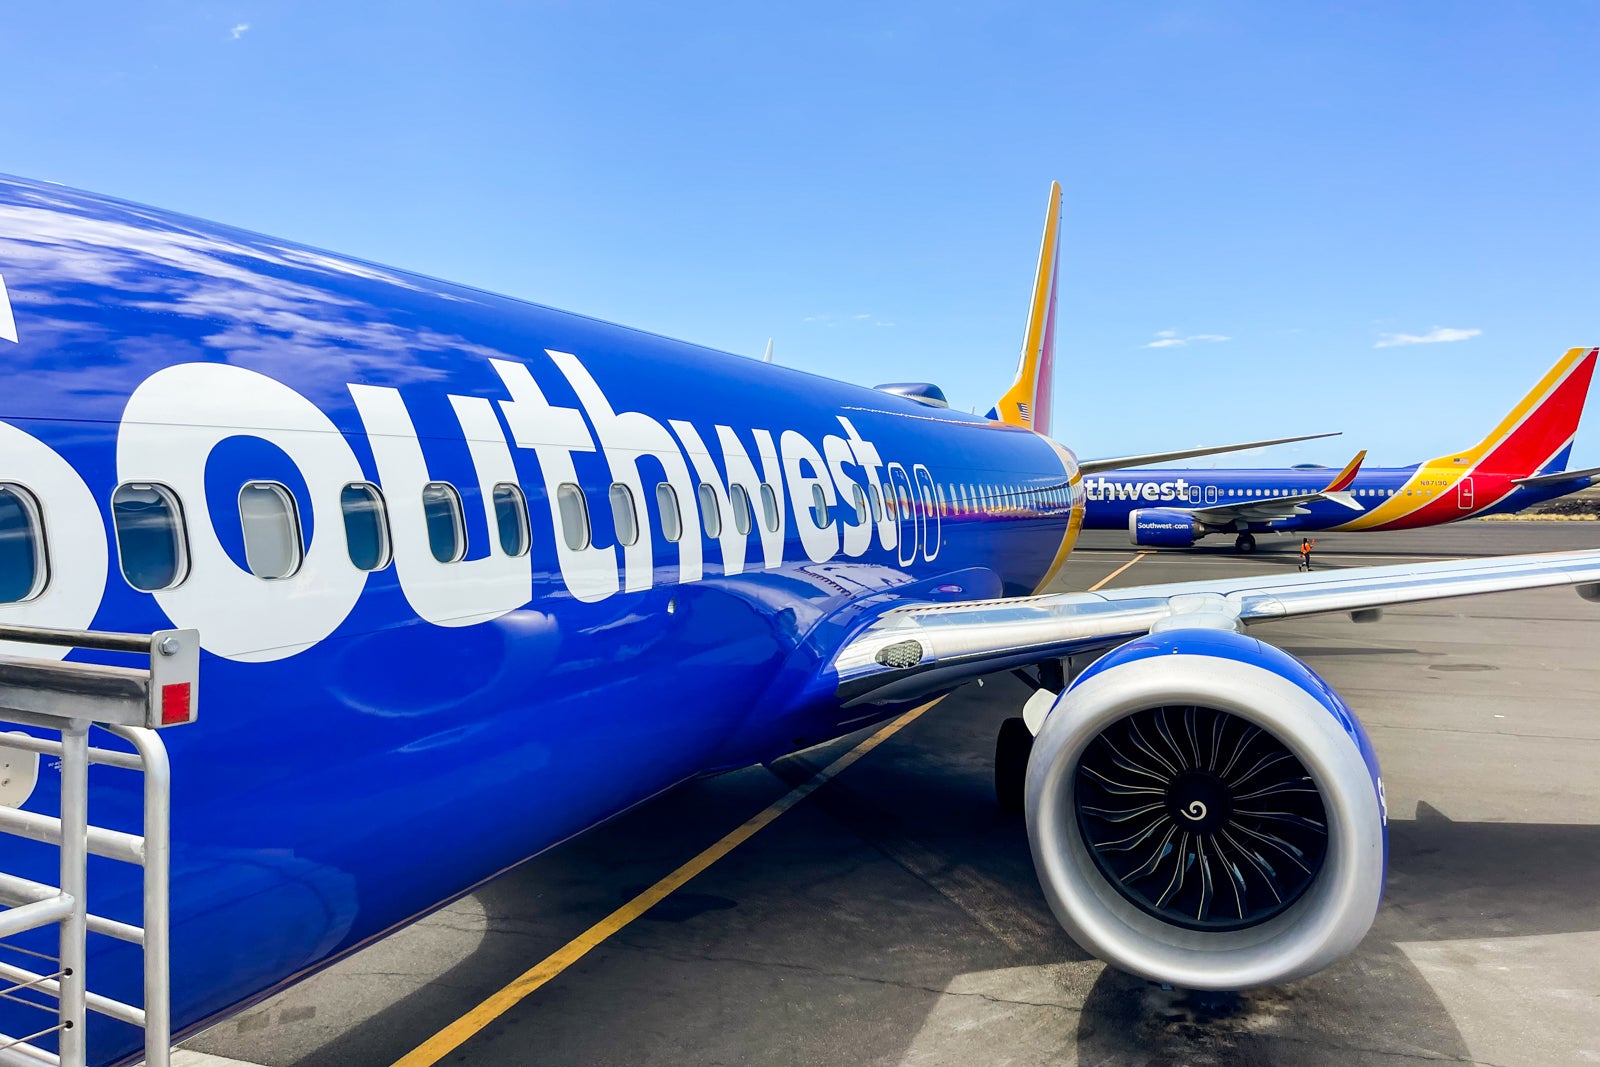 A blue Southwest Airlines Boeing 737 MAX 8 is parked at an airport gate, with another Southwest plane taxiing in the background..